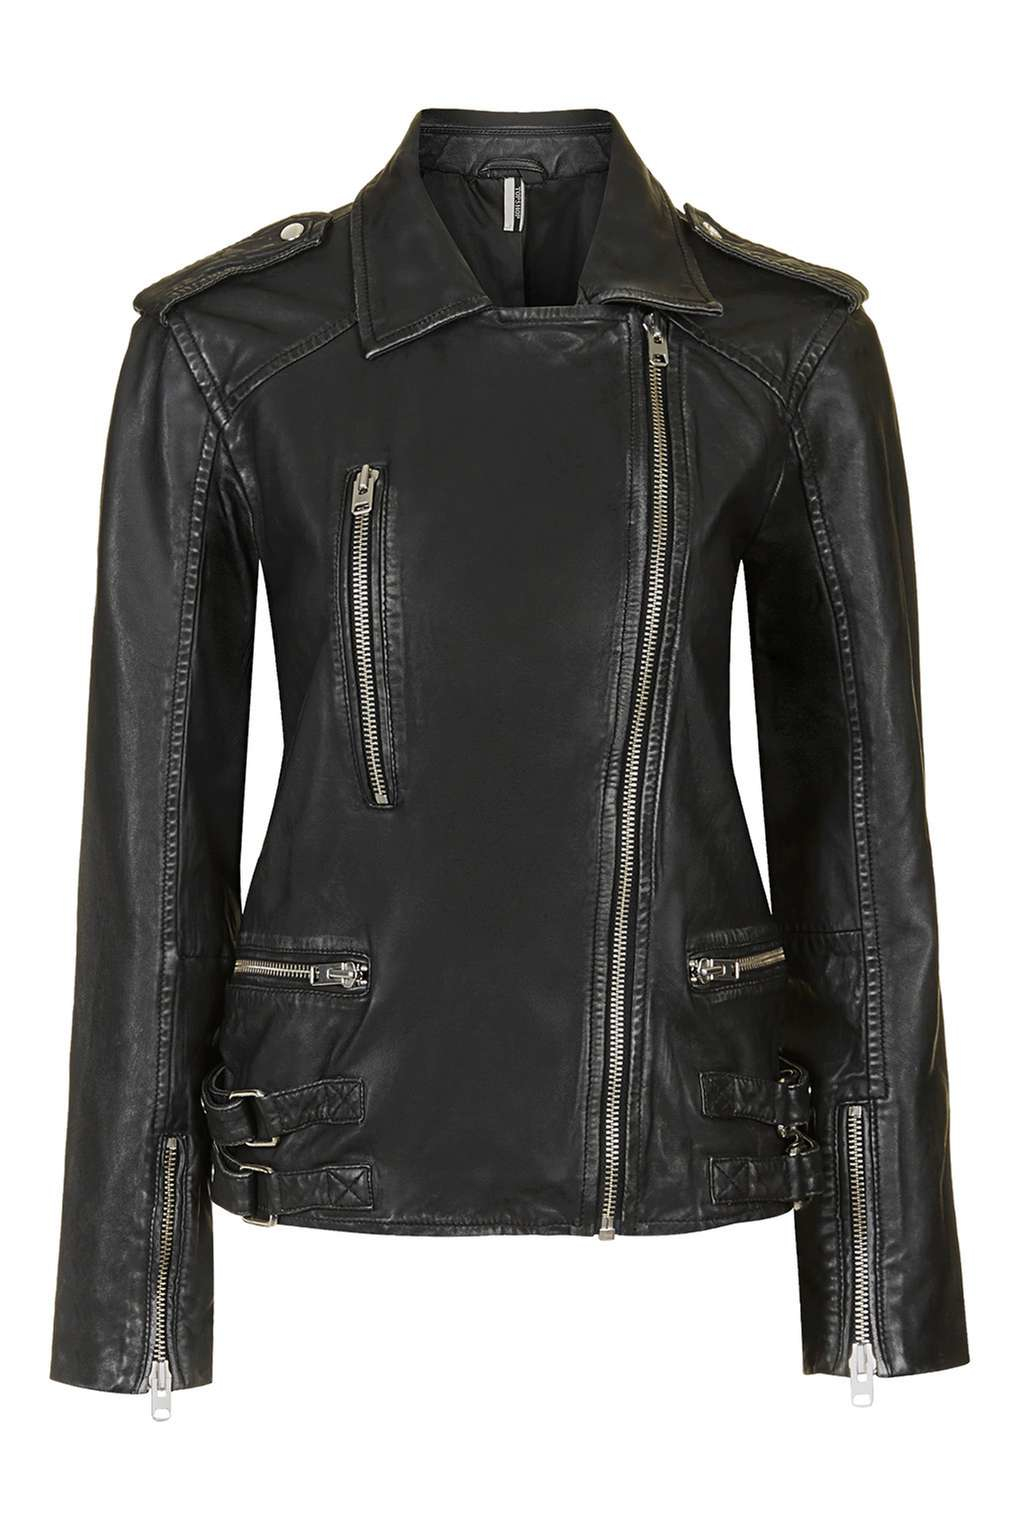 Topshop Tall Oversized Leather Jacket in Black | Lyst